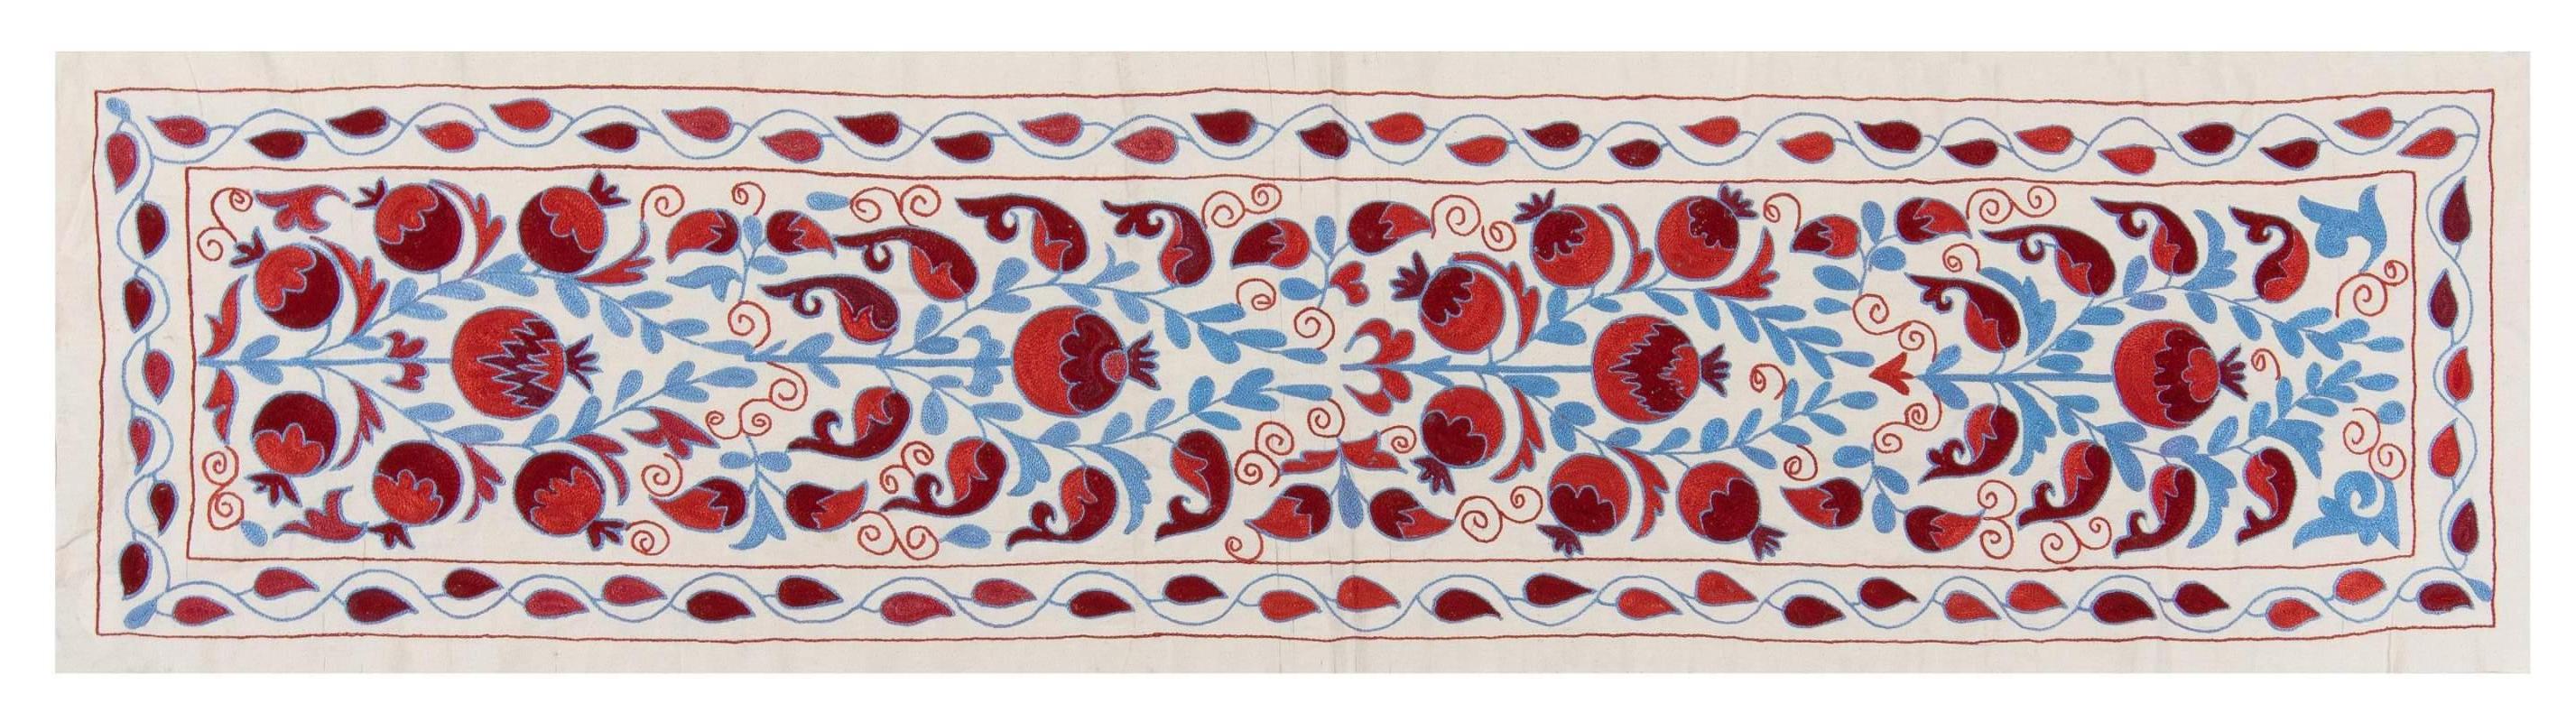 1.7x6.3 Ft Silk Embroidery Table Runner, Uzbek Wall Hanging in Red, Cream & Blue In New Condition For Sale In Philadelphia, PA